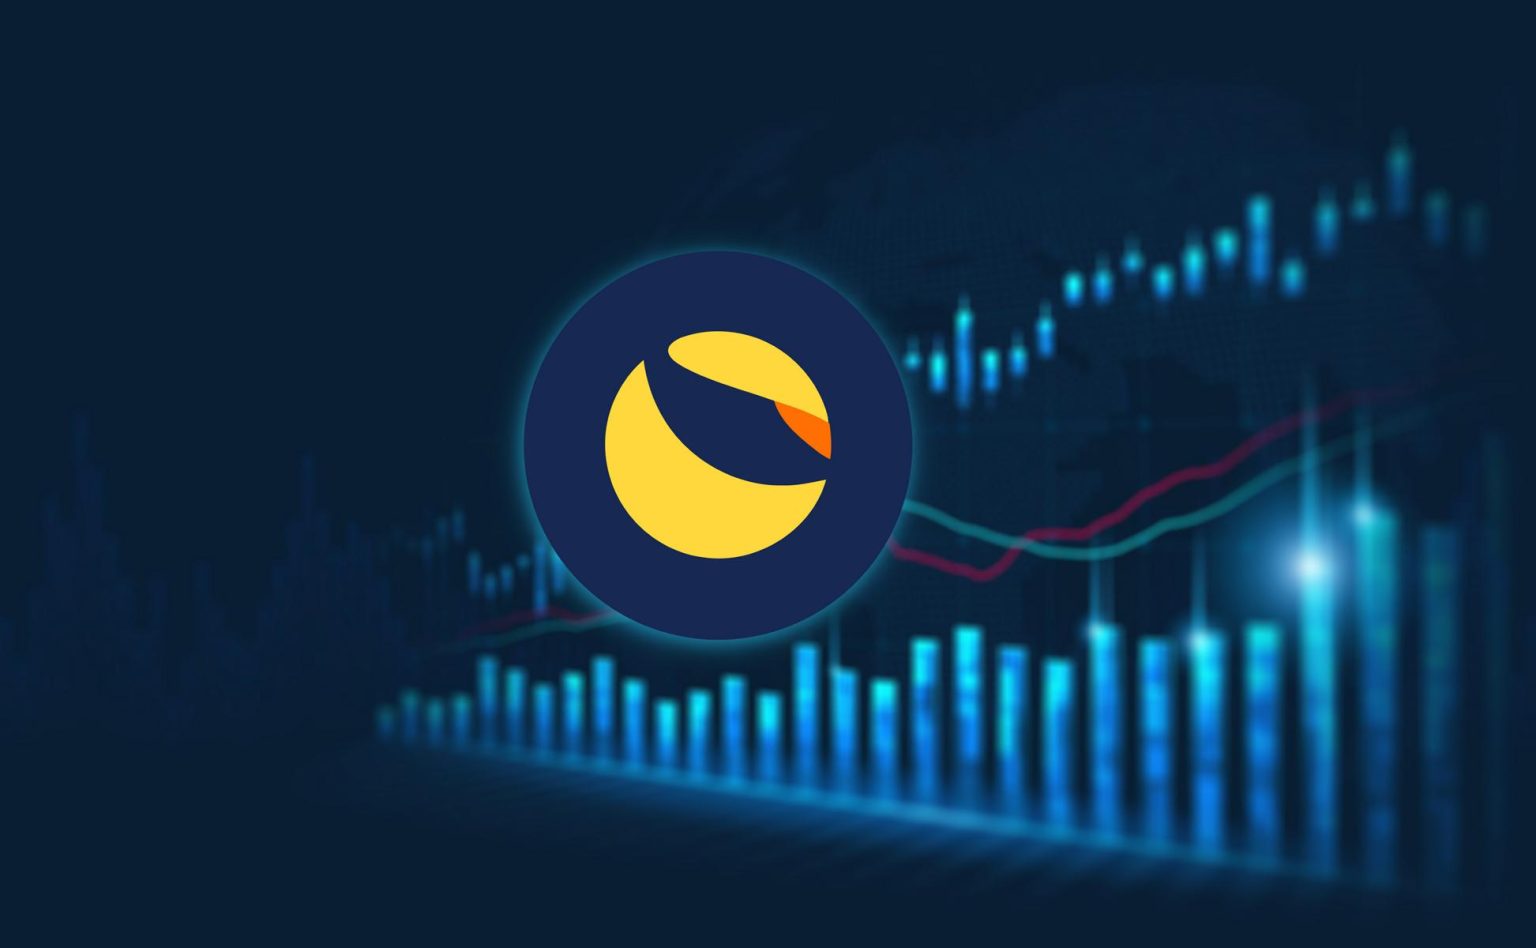 Terra-LUNA-logo-with-price-rising-trading-background